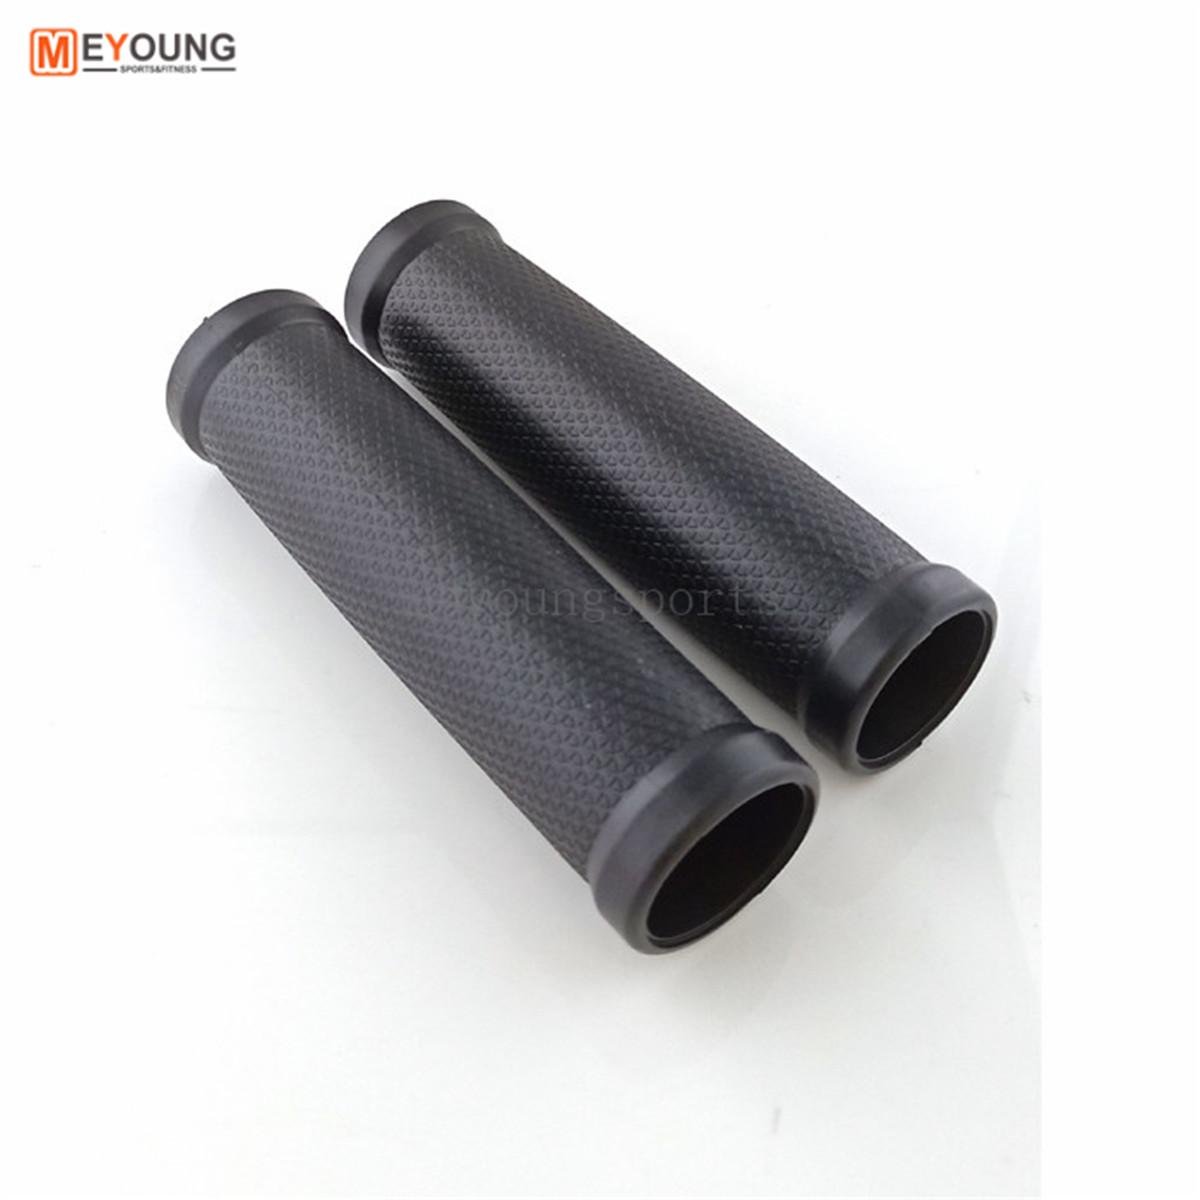 Exercise Bike Gym Equipment Hand Grip and End Cap 2